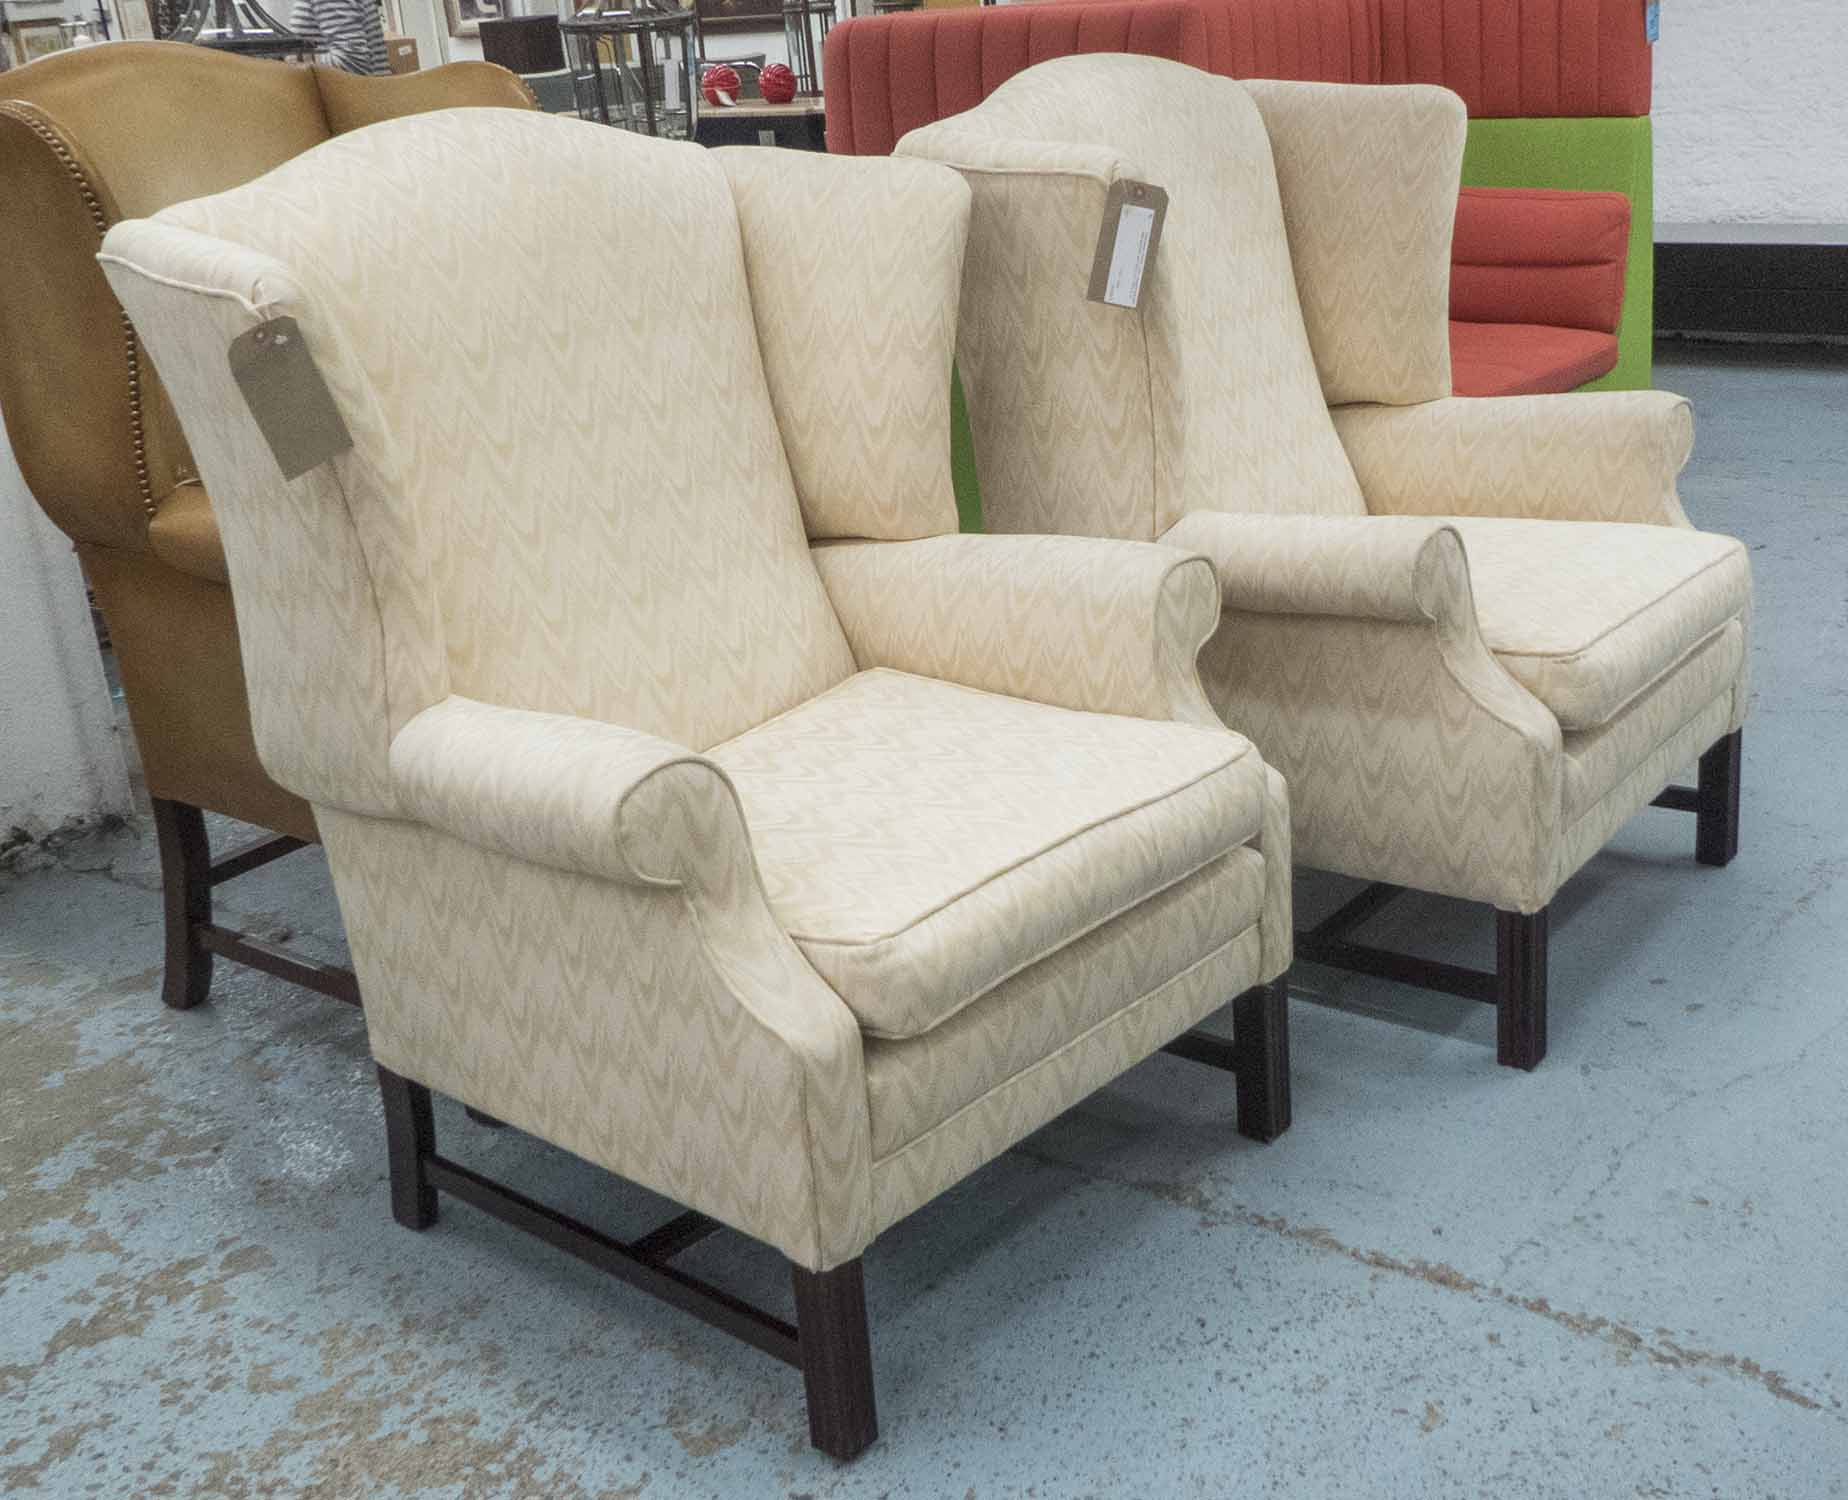 WING BACK CHAIRS, a pair, Georgian style with patterned fabric, each